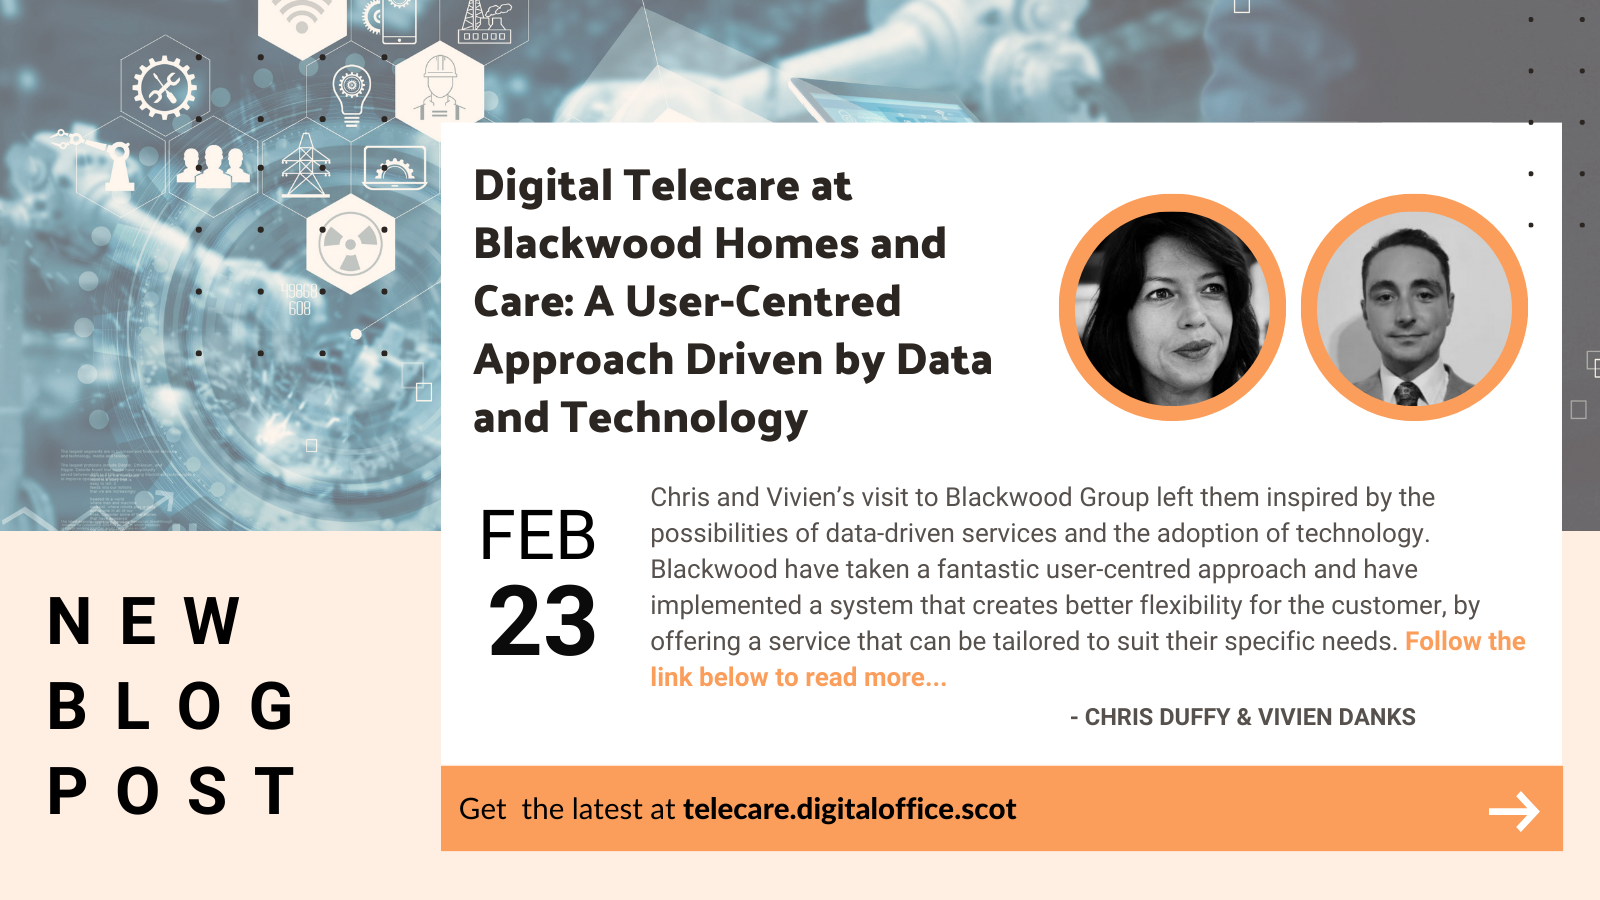 Digital Telecare at Blackwood Homes and Care: A User-Centred Approach Driven by Data and Technology 